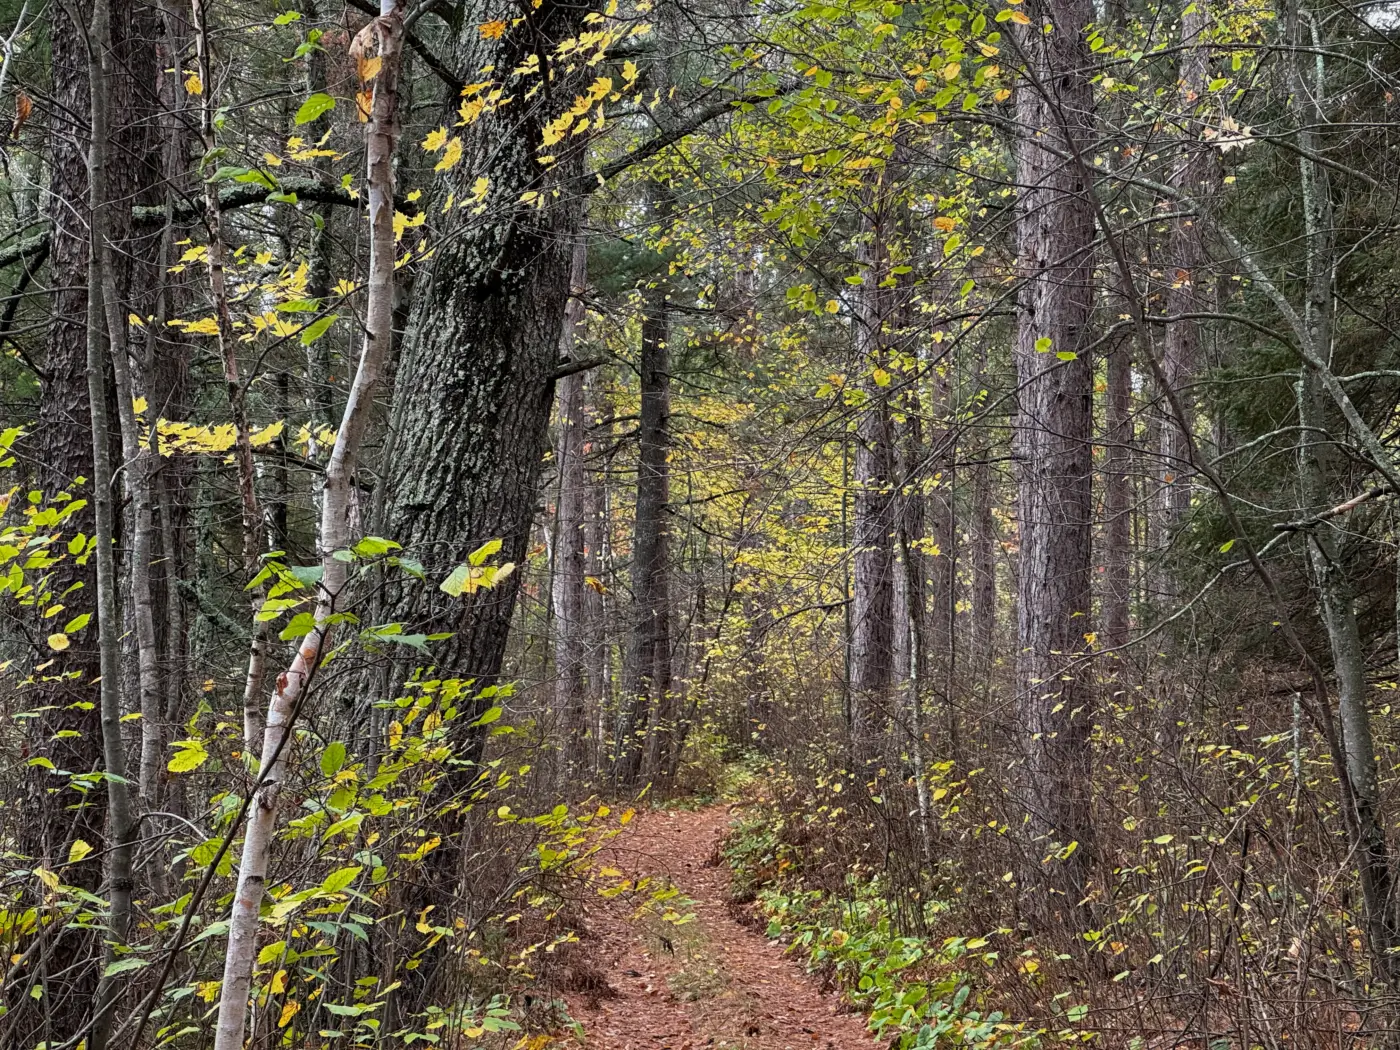 Photo of a path through a pine forest